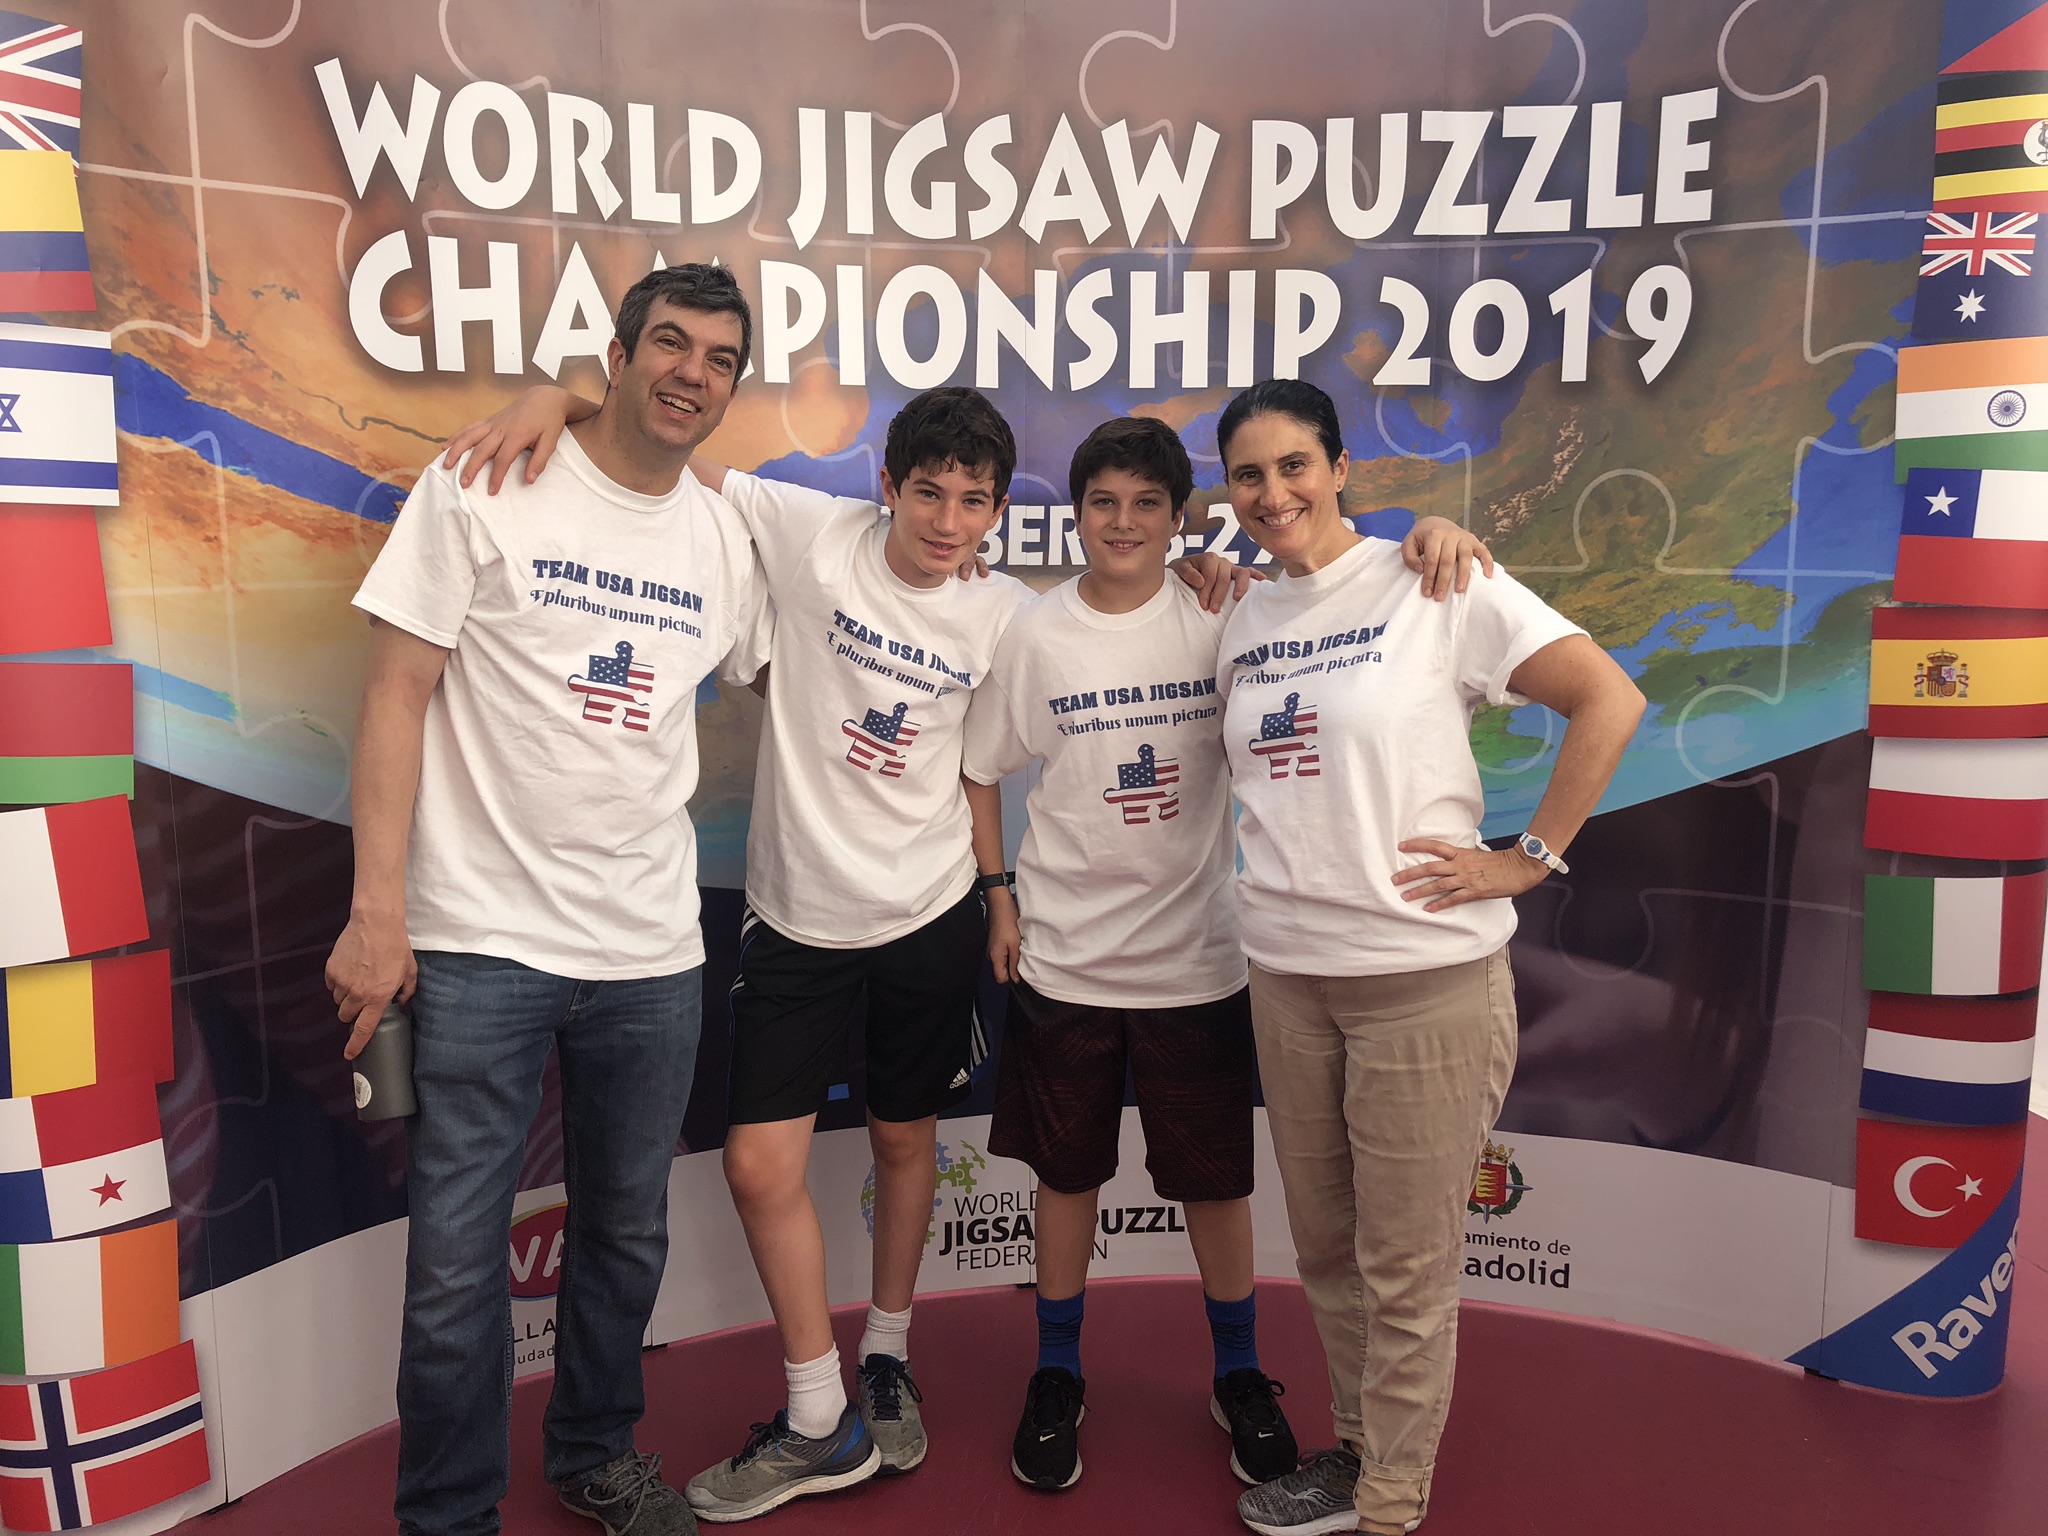 Aj And His Family Representing The Usa At The World Jigsaw Puzzle Championship